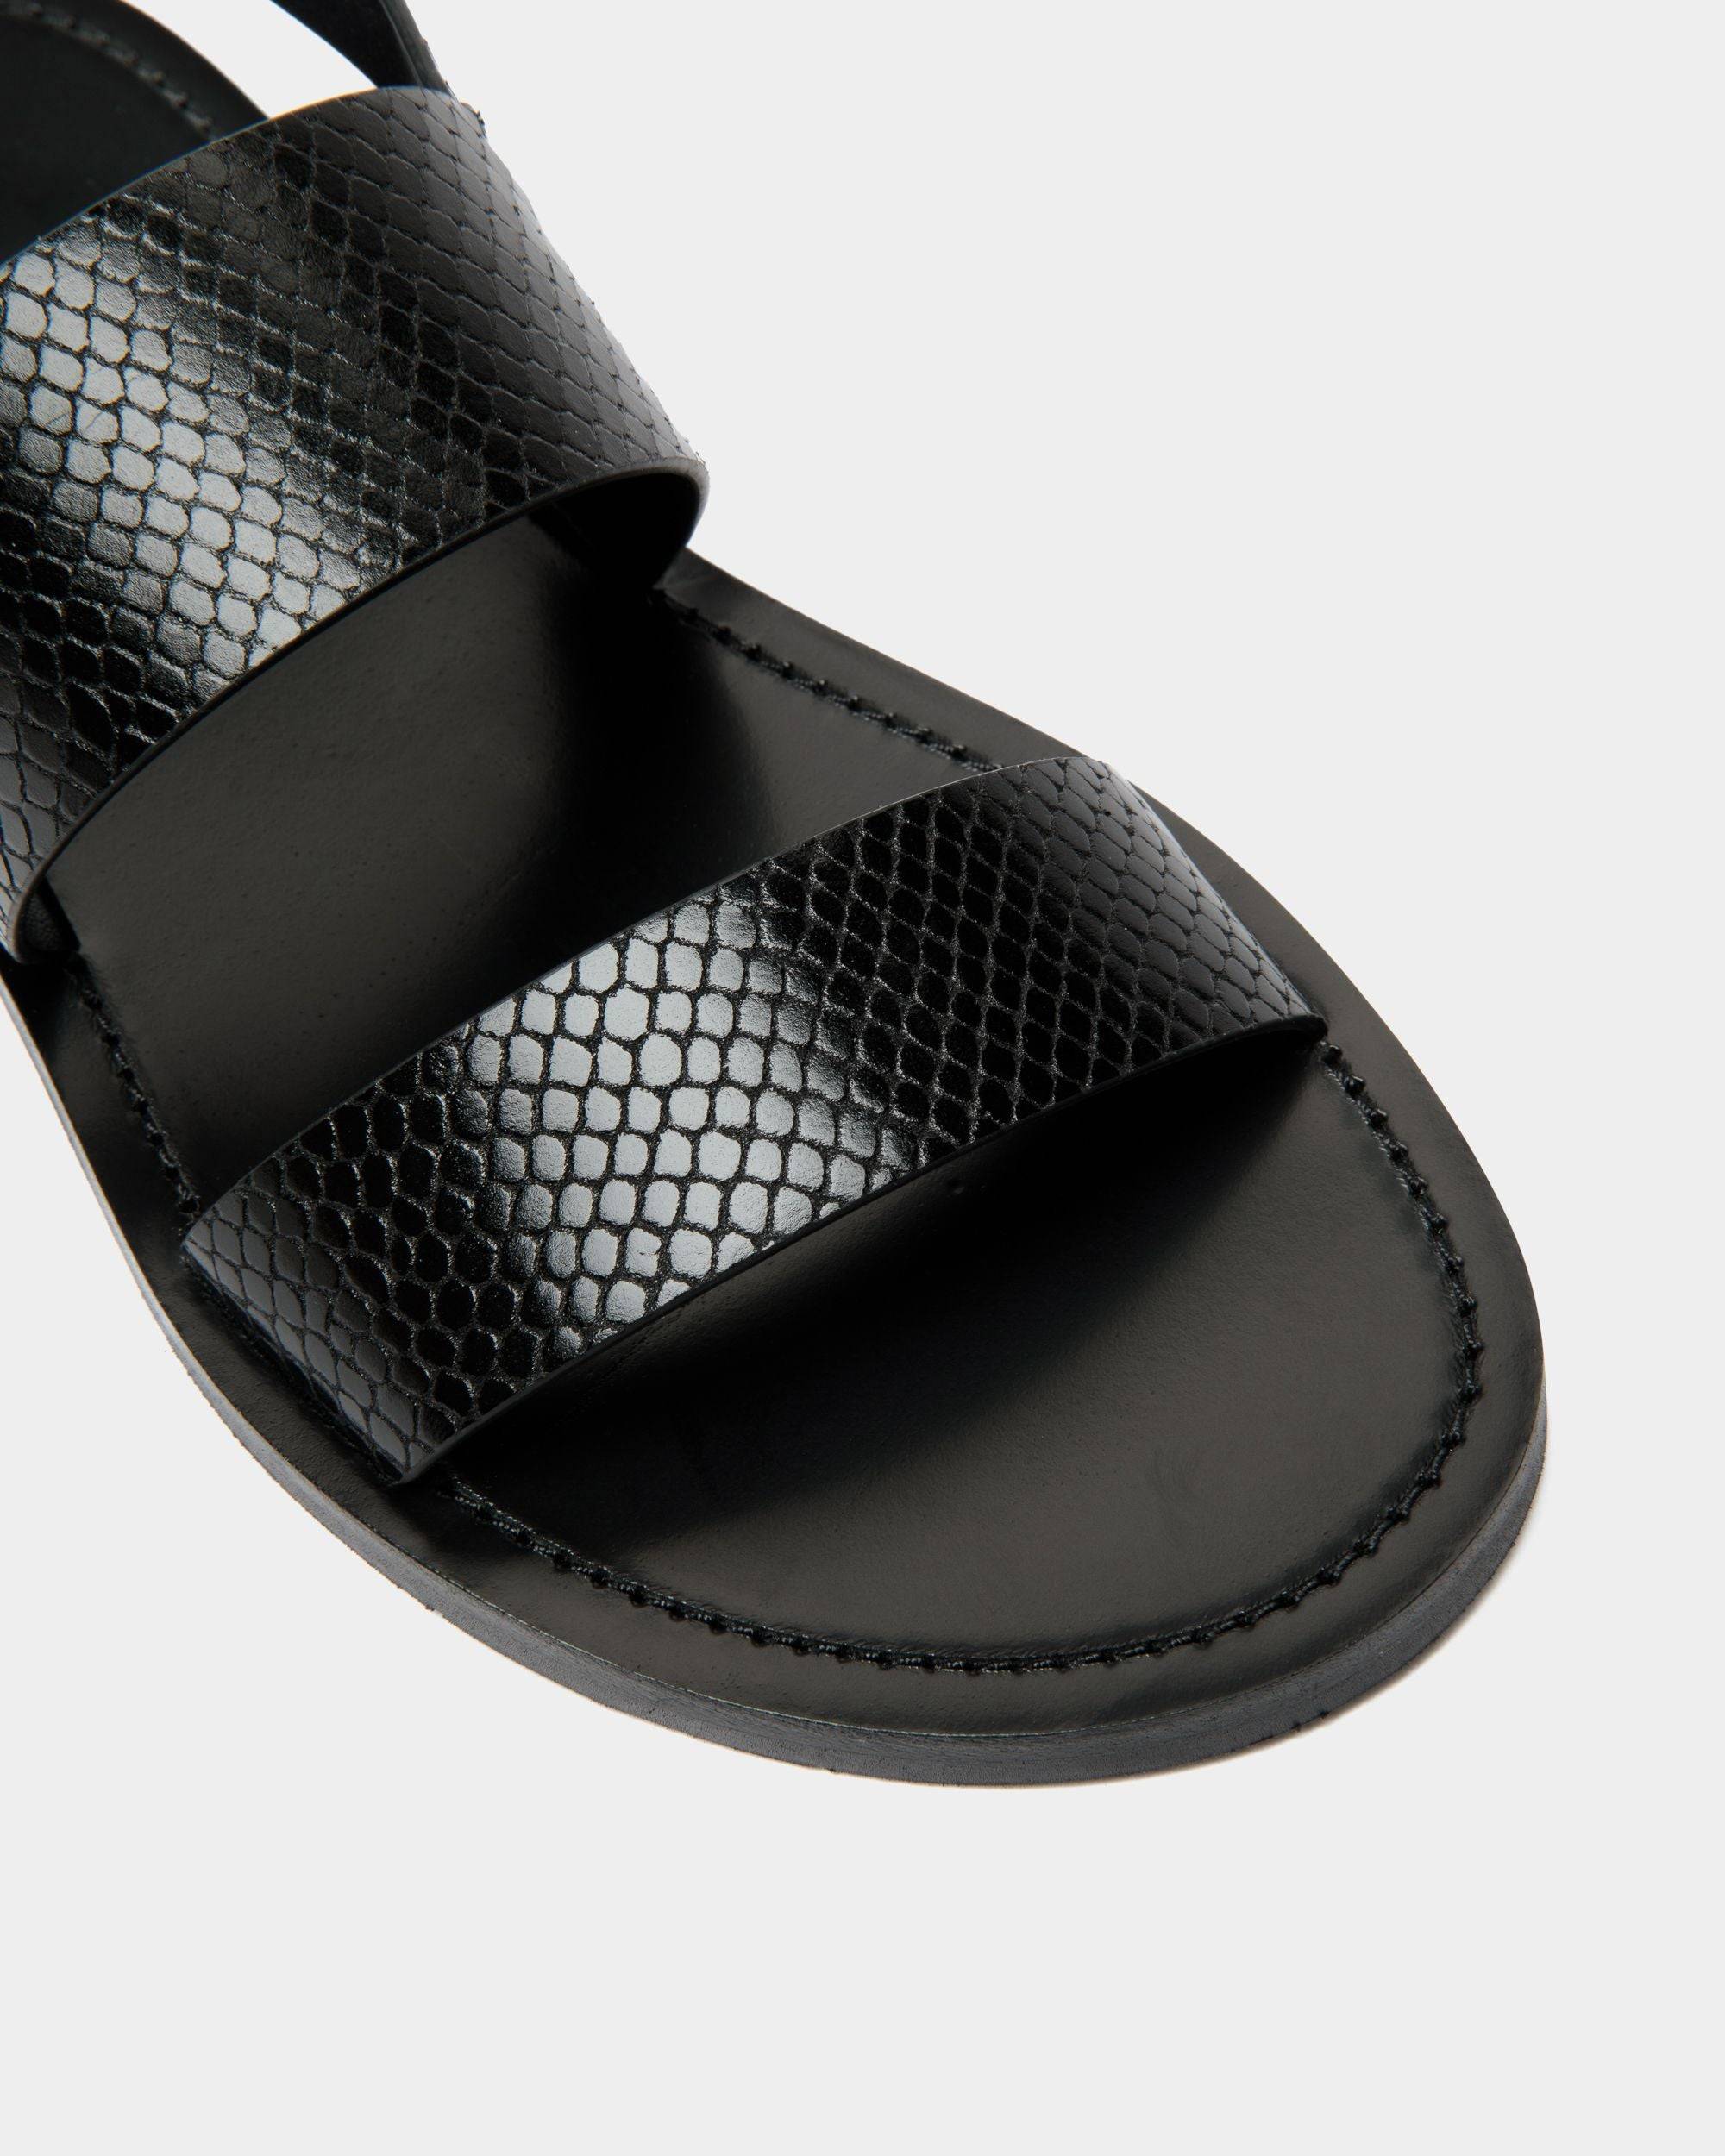 Baudy | Women's Flat Sandal in Black Python Printed Leather | Bally | Still Life Detail